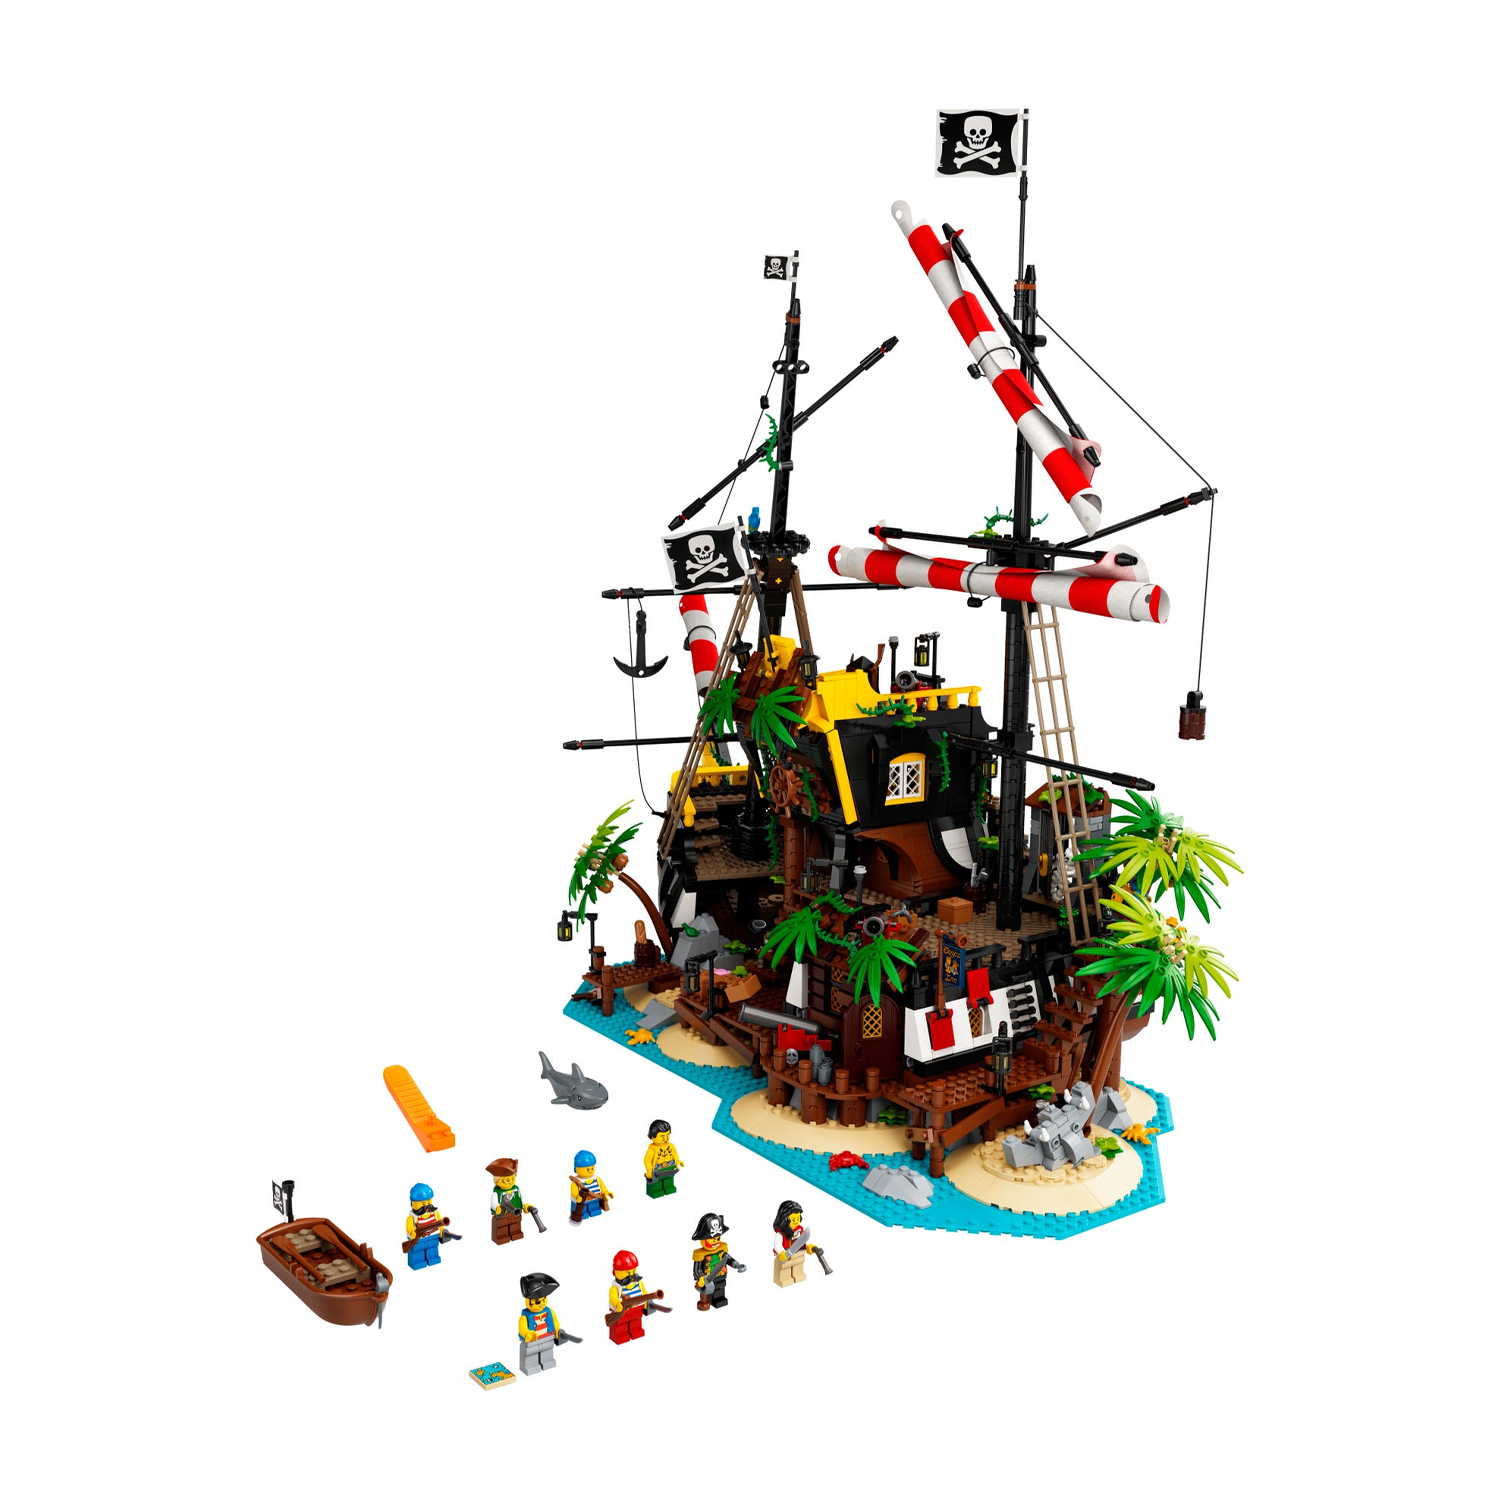 LEGO 6316404 Ideas Pirates of Barracuda Bay Pirate Shipwreck Kit for Play and Display 21322 - image 1 of 8